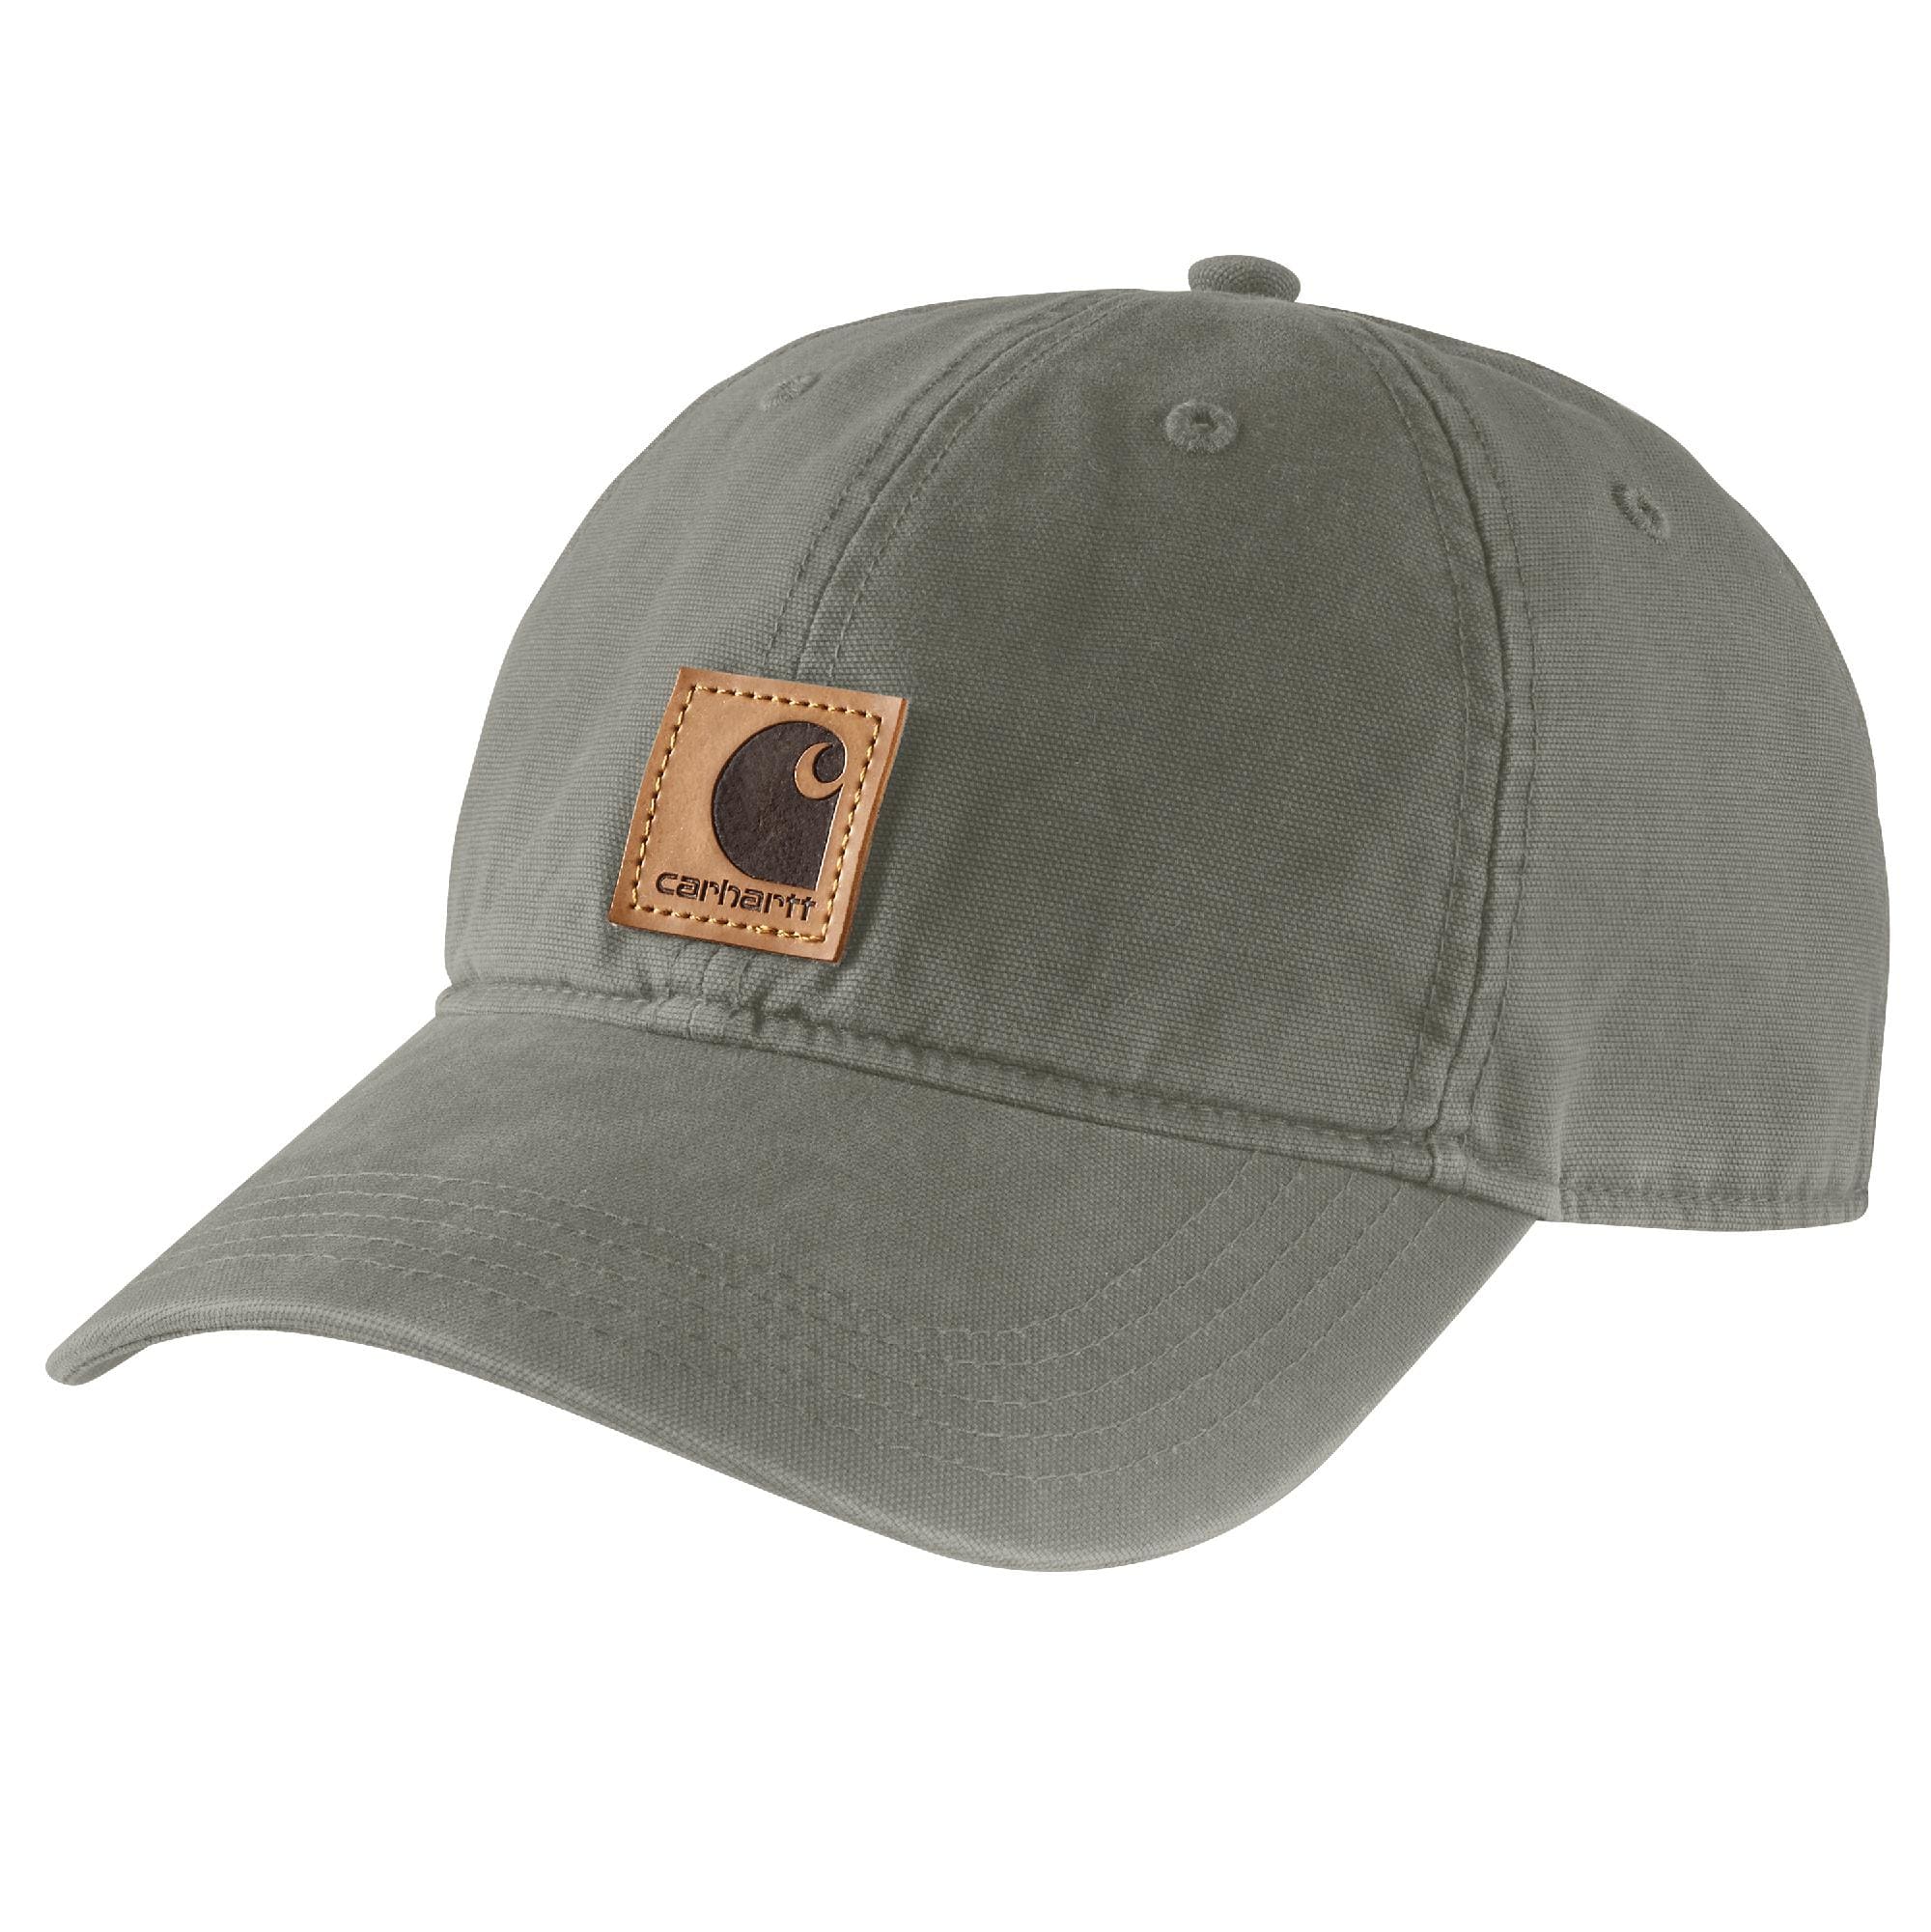 Cotton Cap Olive Hats Dusty Baseball Men\'s in Carhartt the at department